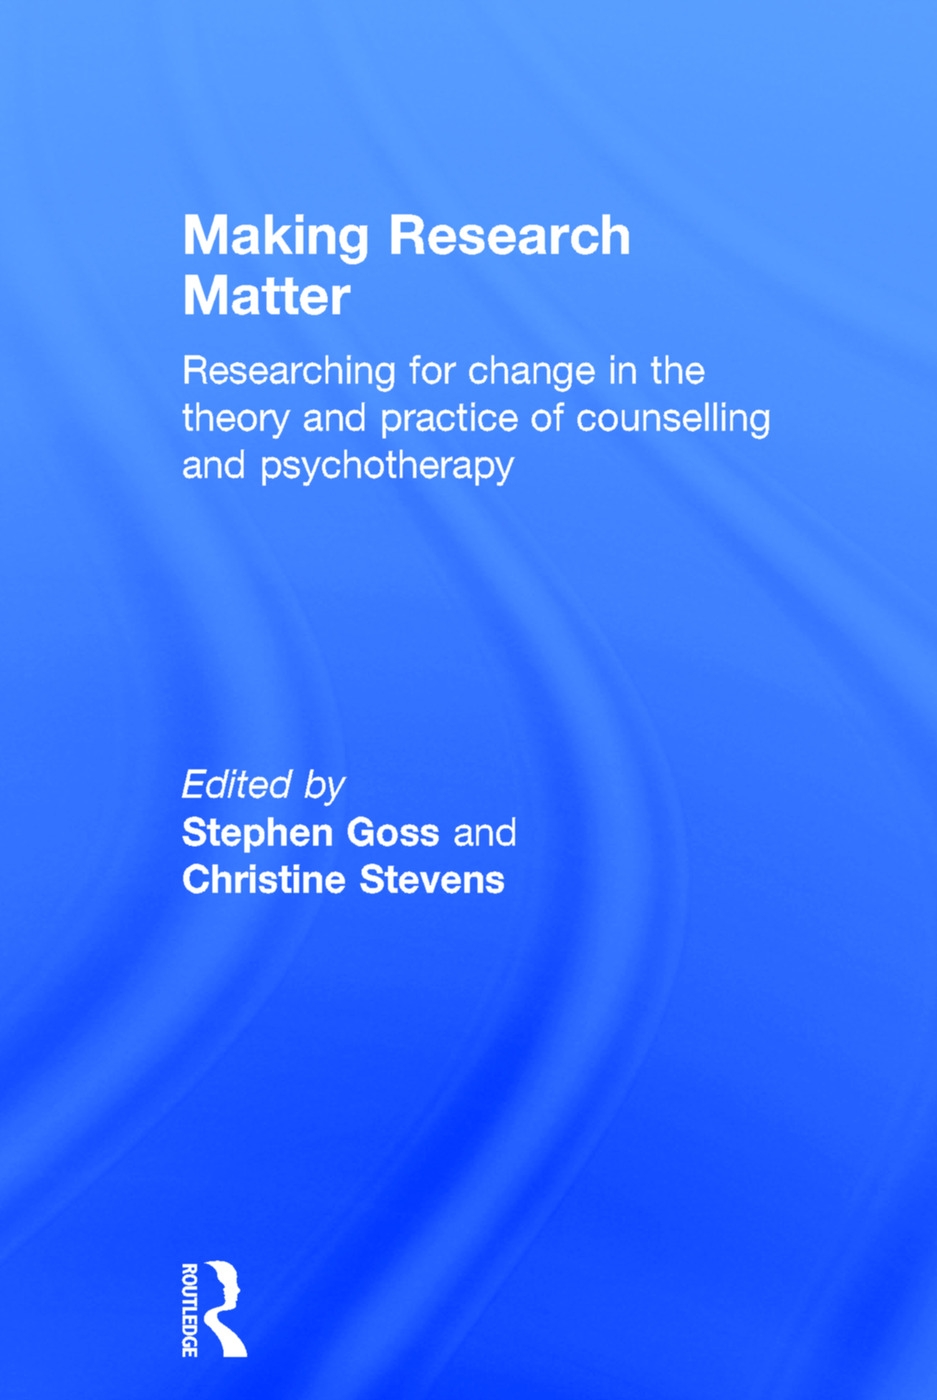 Making Research Matter: Researching for Change in the Theory and Practice of Counselling and Psychotherapy